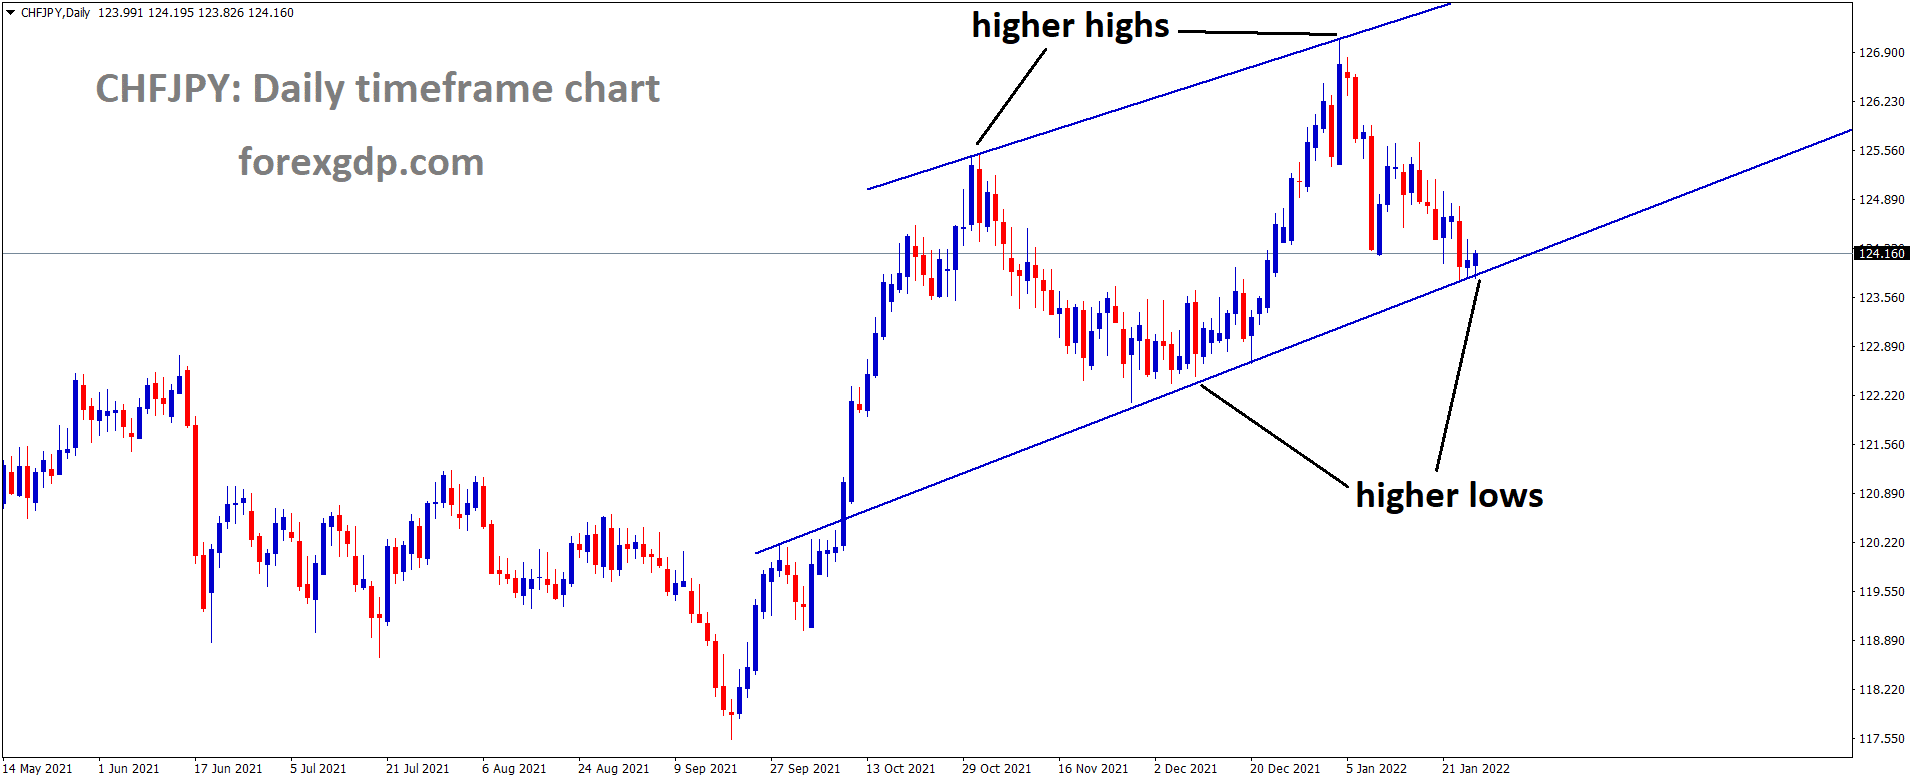 CHFJPY is moving in an Ascending channel and the market has rebounded from the higher low area of the channel.